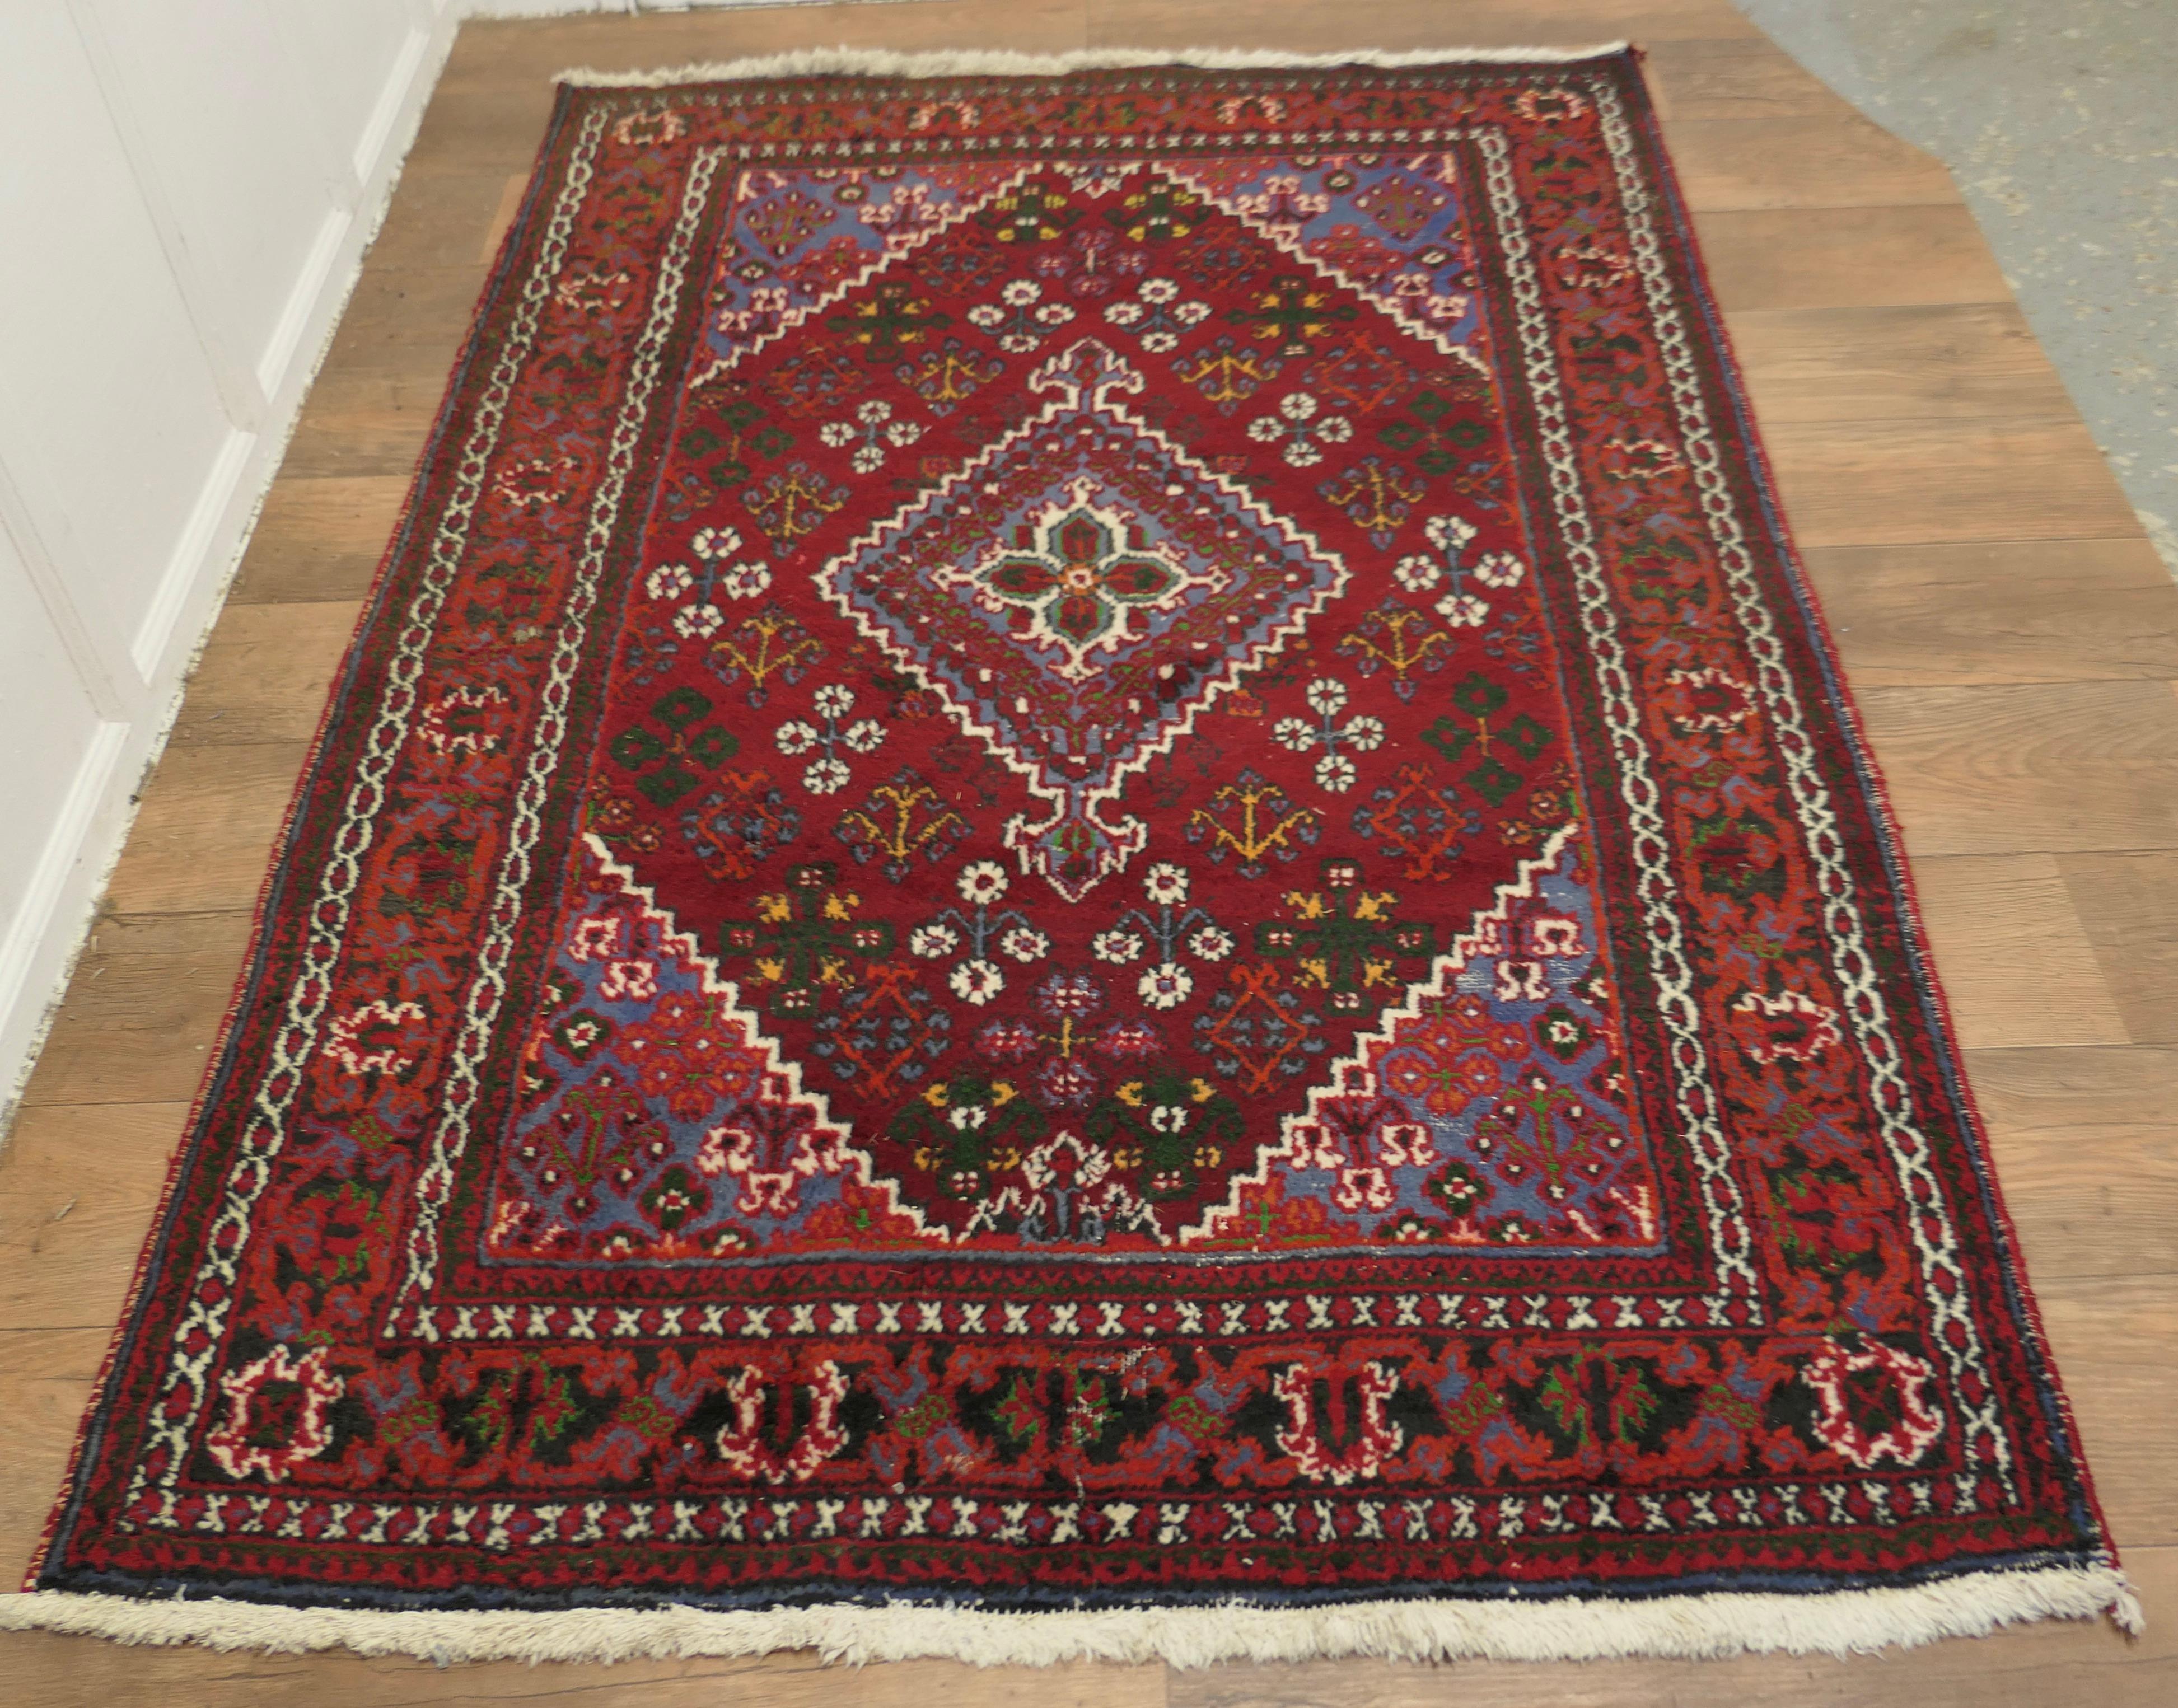 A Lovely Bright Red Wool Rug, Tree of Life Pattern

The Carpet is a wonderful Bright colour with an attractive pattern and a wide border
This rug is from the the early 20th century it measures 80” x 53” the fringes are a little short and there is